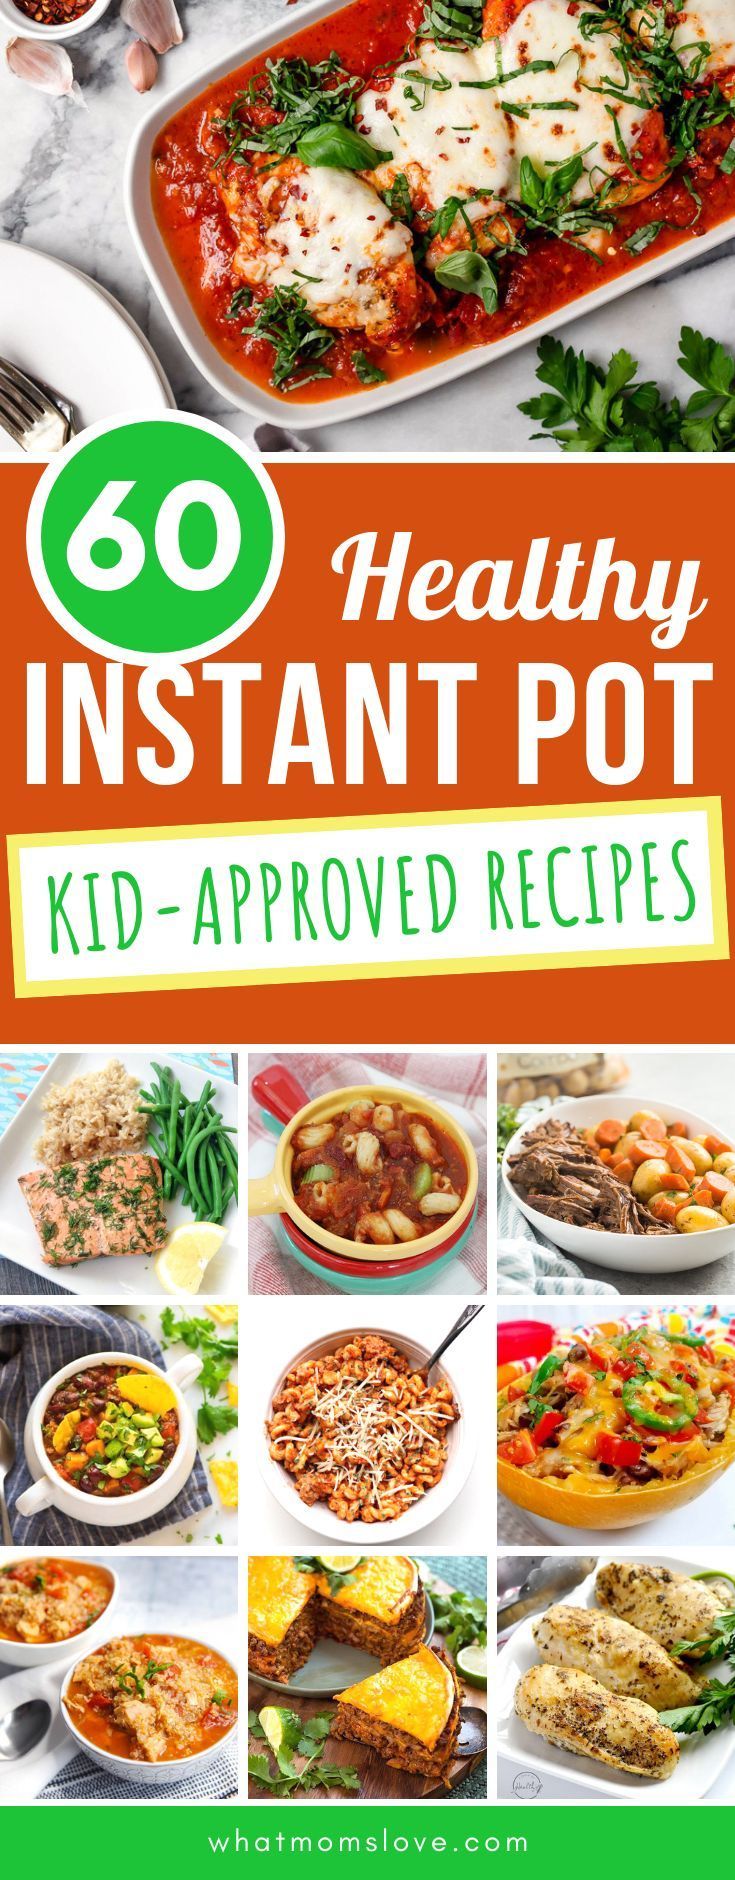 60 Kid-Friendly, Healthy Instant Pot Recipes Your Whole Family Will Enjoy -   16 healthy recipes For Picky Eaters nutrition ideas